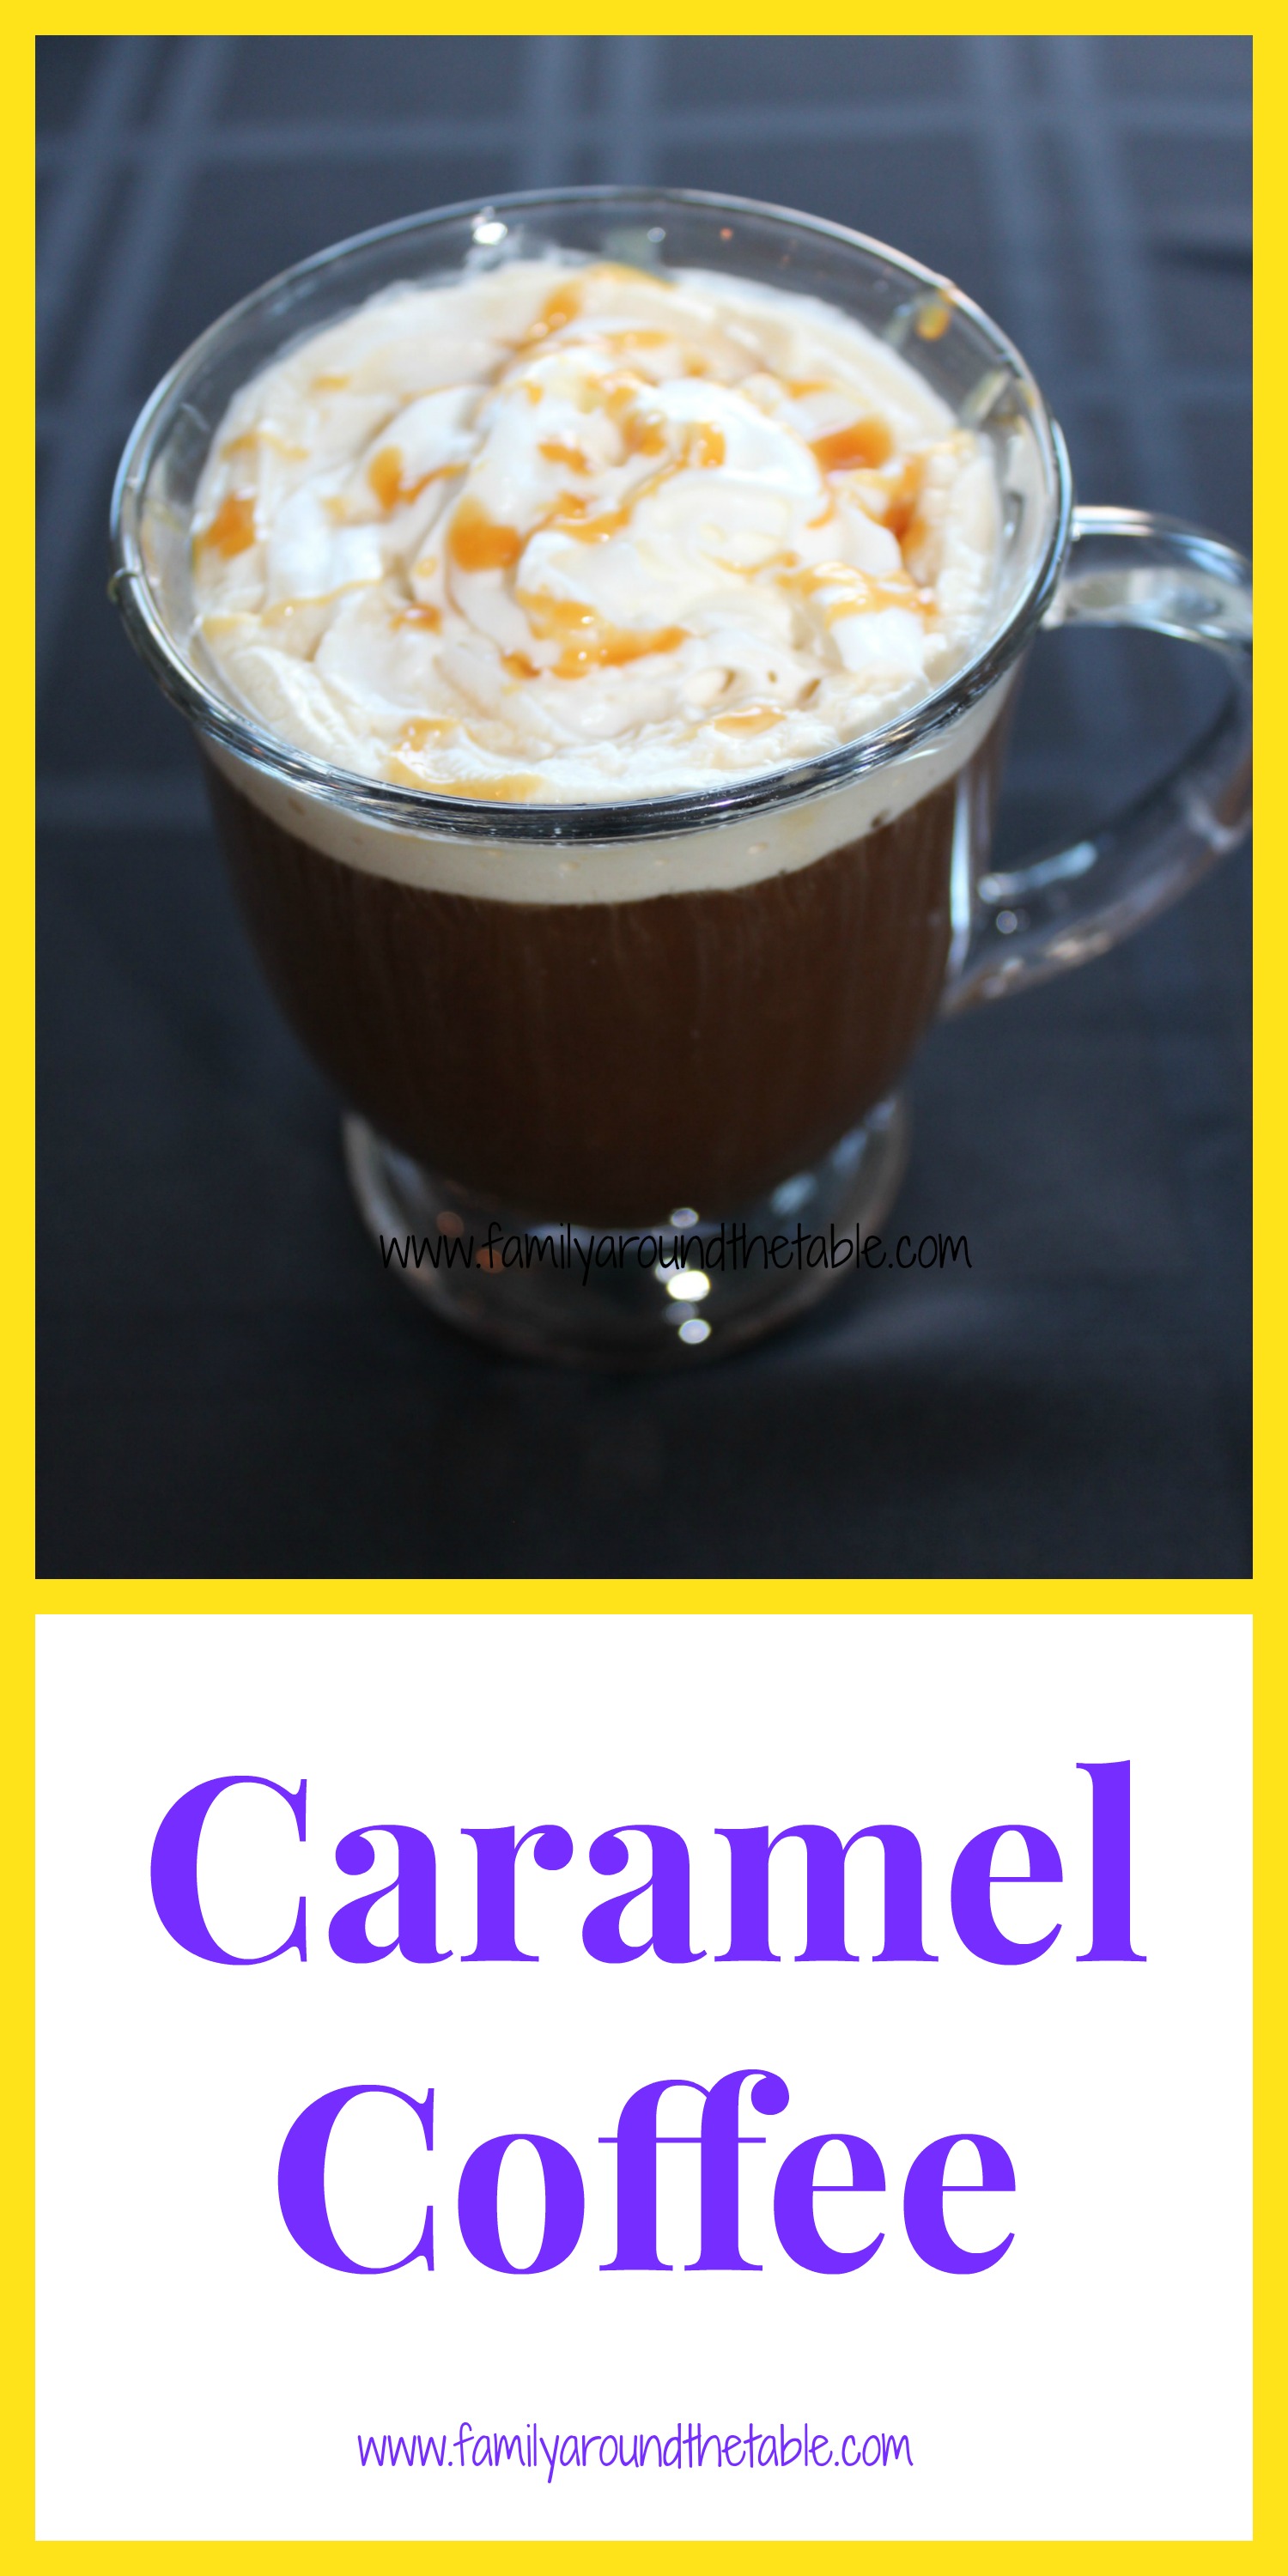 Caramel coffee is easy to make and impressive to serve.